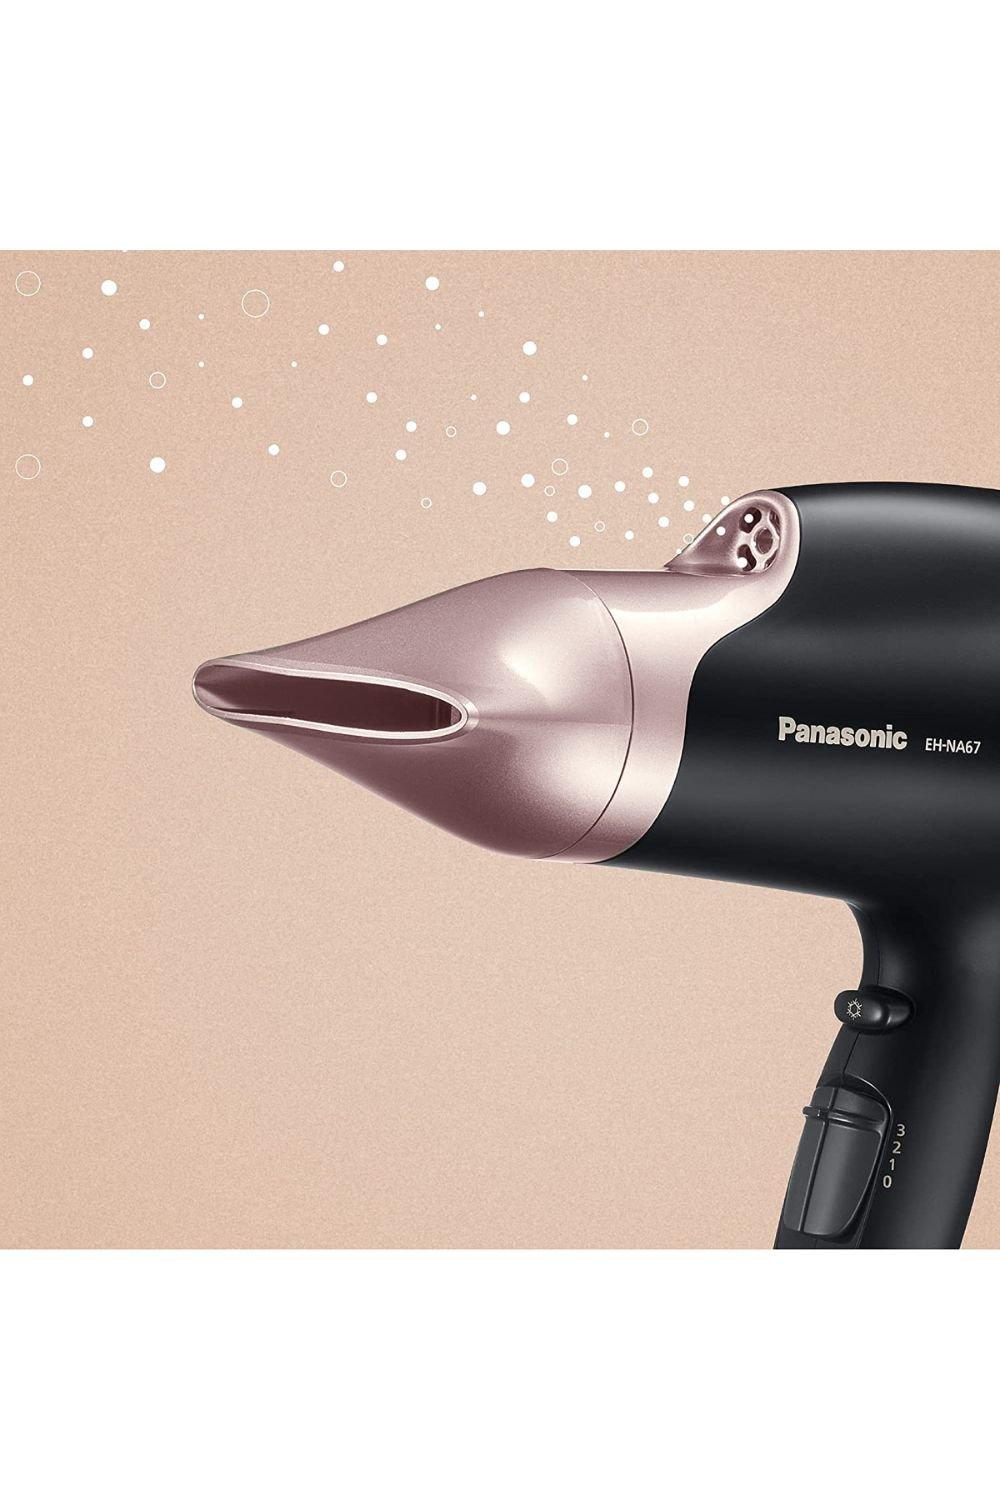 Hair Styling Tools Panasonic Oscillating (Pink EH-NA67 Scalp Dryer Protection and Nozzle nanoe Hair Gold) | Diffuser | for with